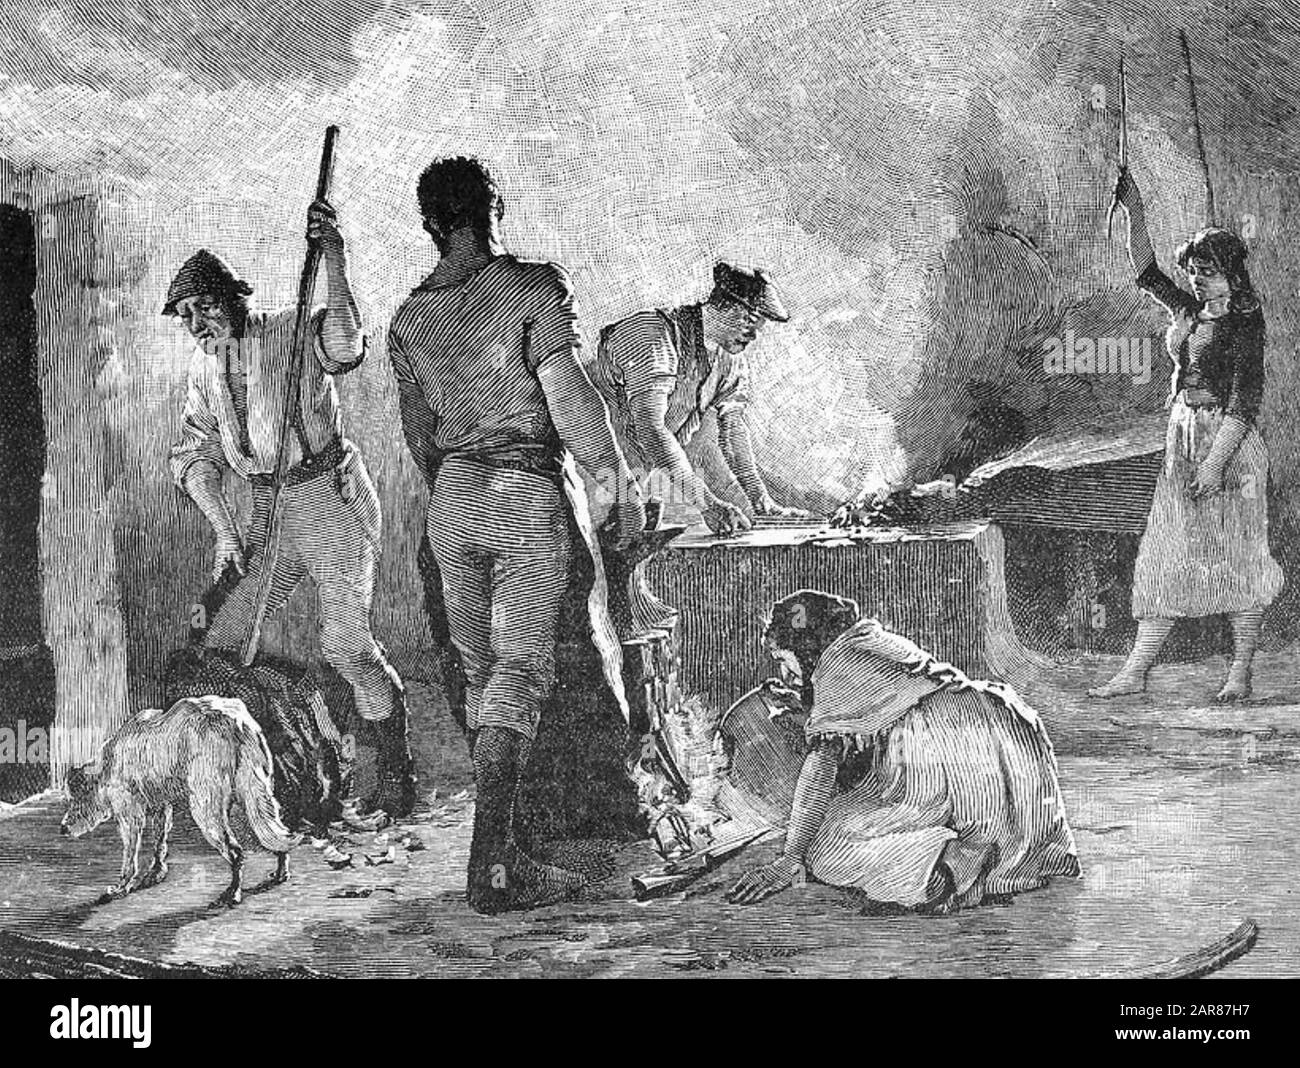 YOUNG IRELAND REBELLION OF 1848. Forging pikes. Stock Photo